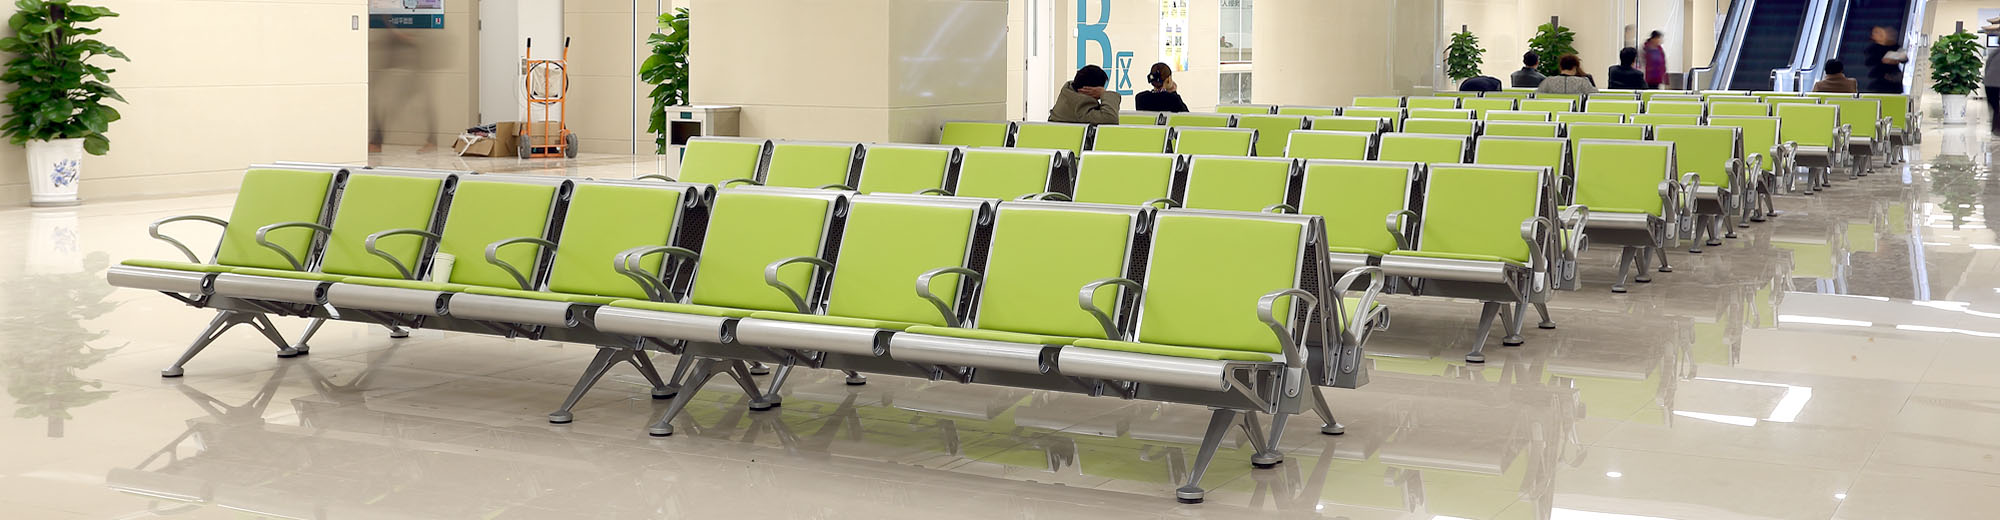 airport seating,waiting chairs